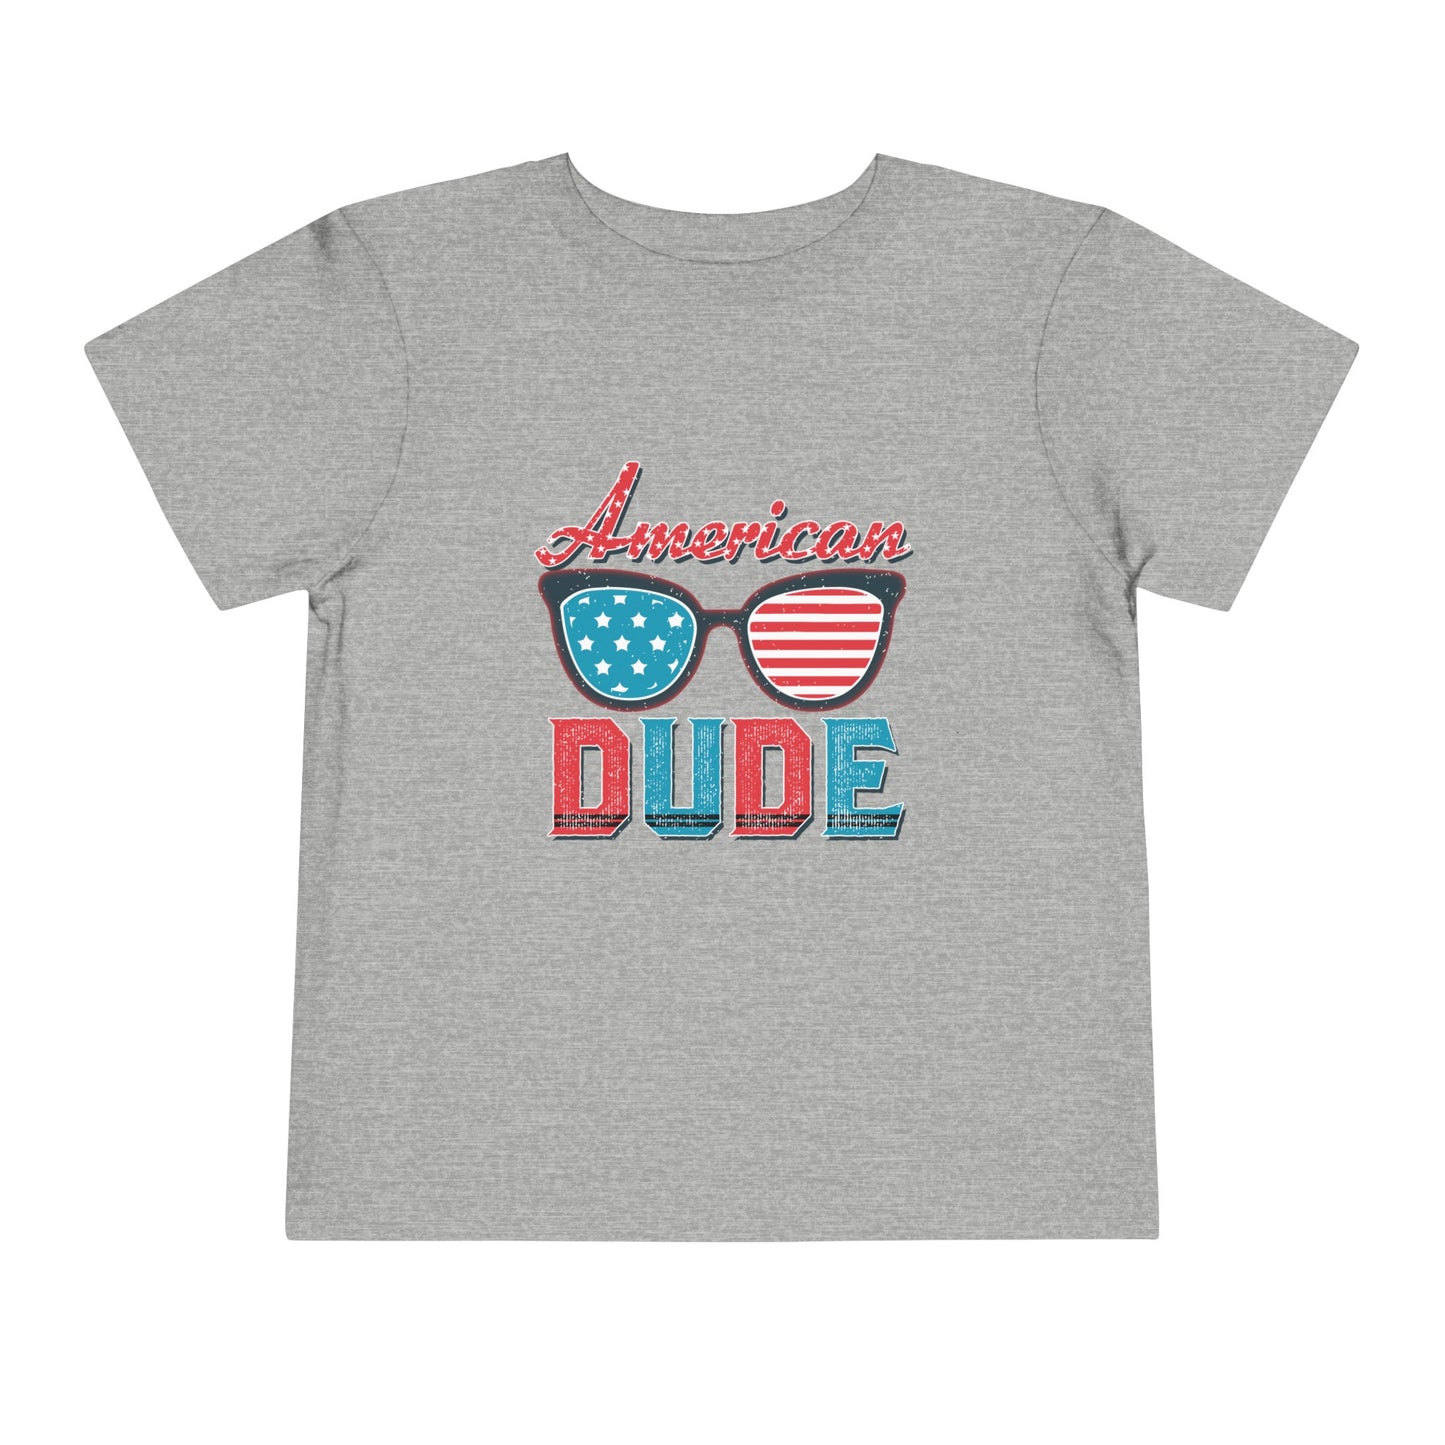 American Dude Toddler Boy's USA 4th of July Short Sleeve Tee